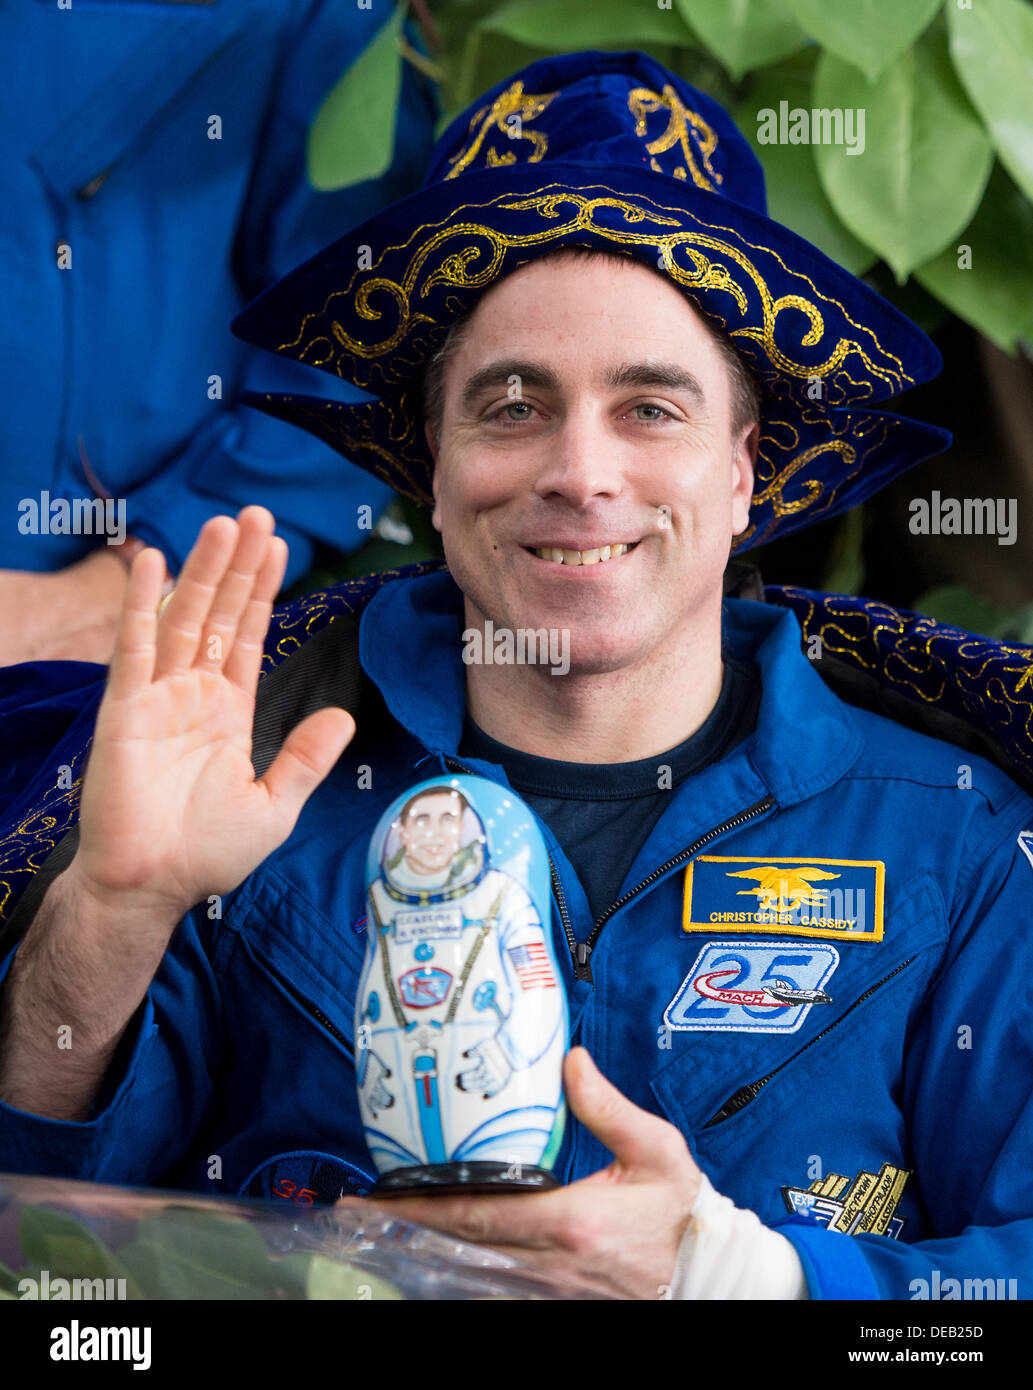 NASA Expedition 36 Flight Engineer Chris Cassidy waves during a ceremony at the Karaganda airport after he and Alexander Misurkin and Pavel Vinogradov of Roscosmos landed in a Soyuz TMA-08M capsule September 11, 2013 in Karaganda, Kazakhstan. Vinogradov, Misurkin and Cassidy returned to Earth after five and a half months on the International Space Station. Stock Photo